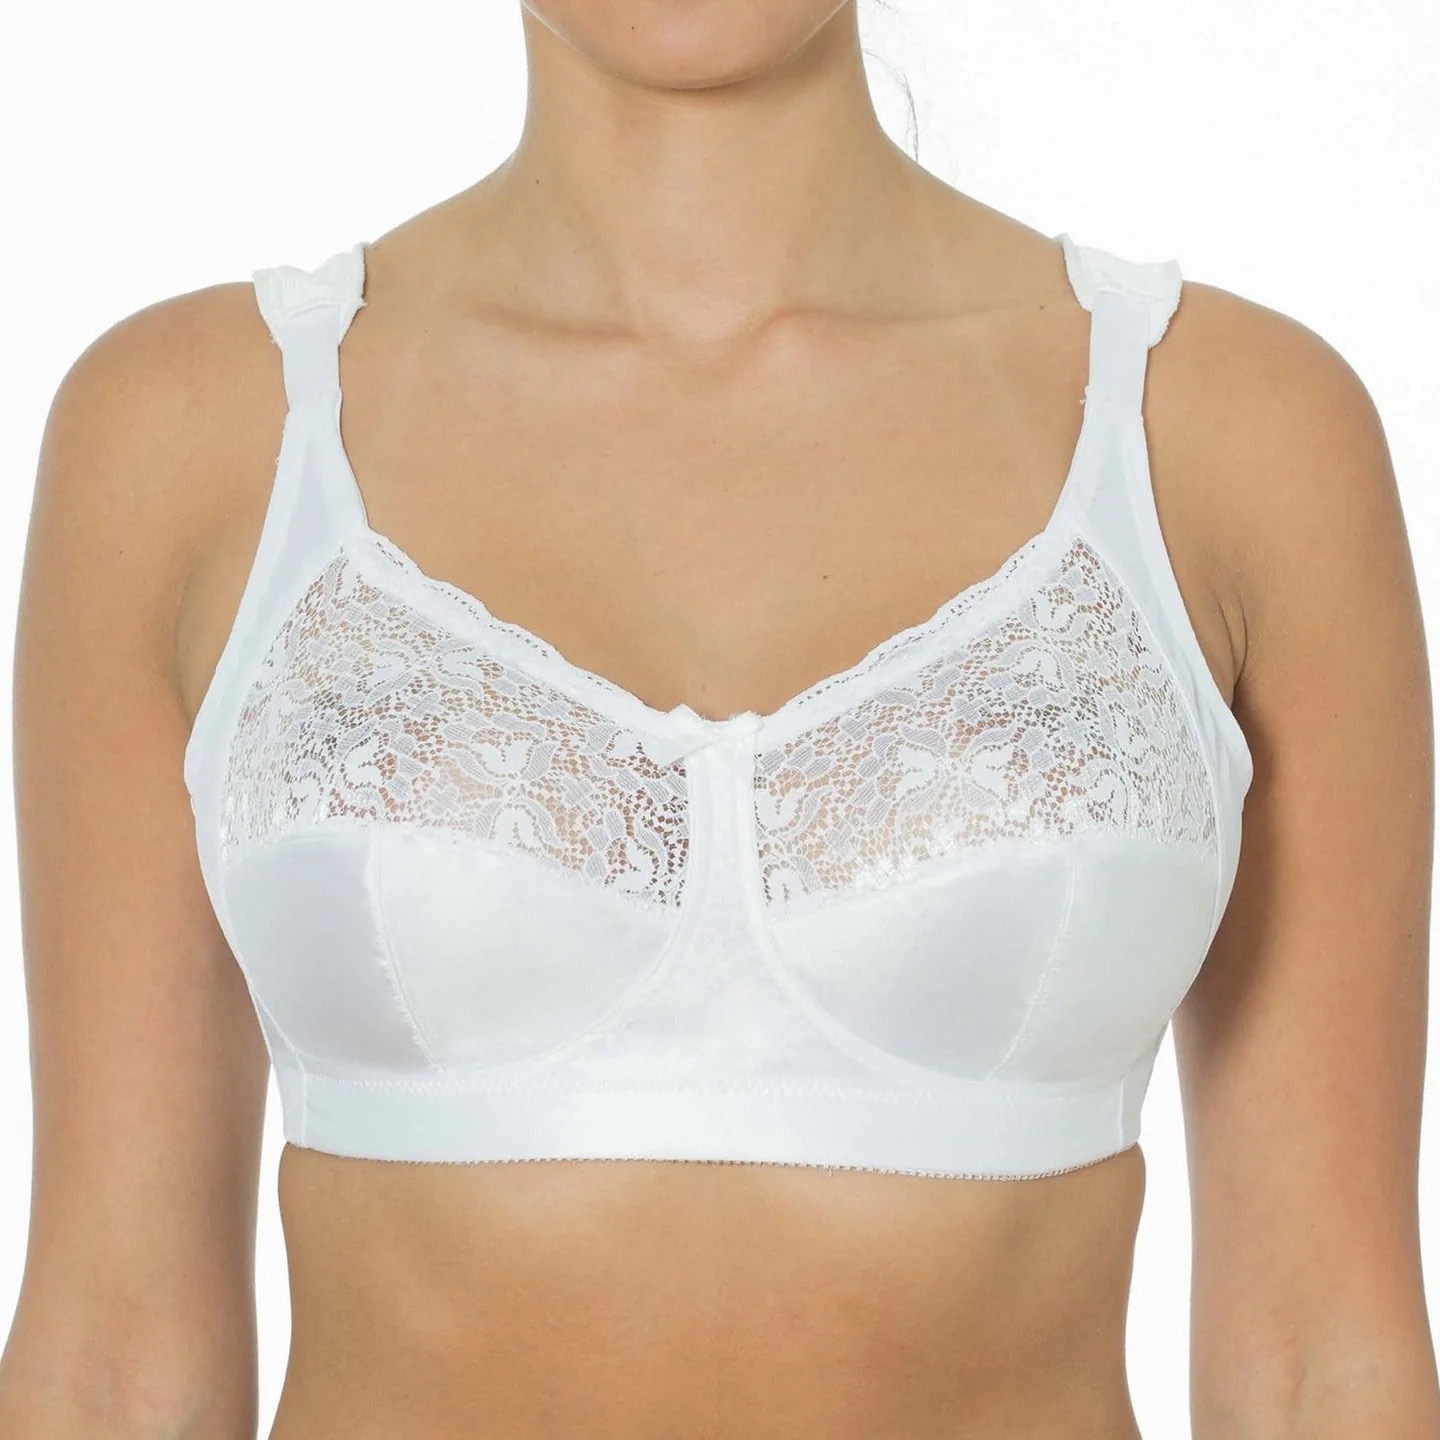 Cortland Intimates Embroidered Soft Cup Bra 7204